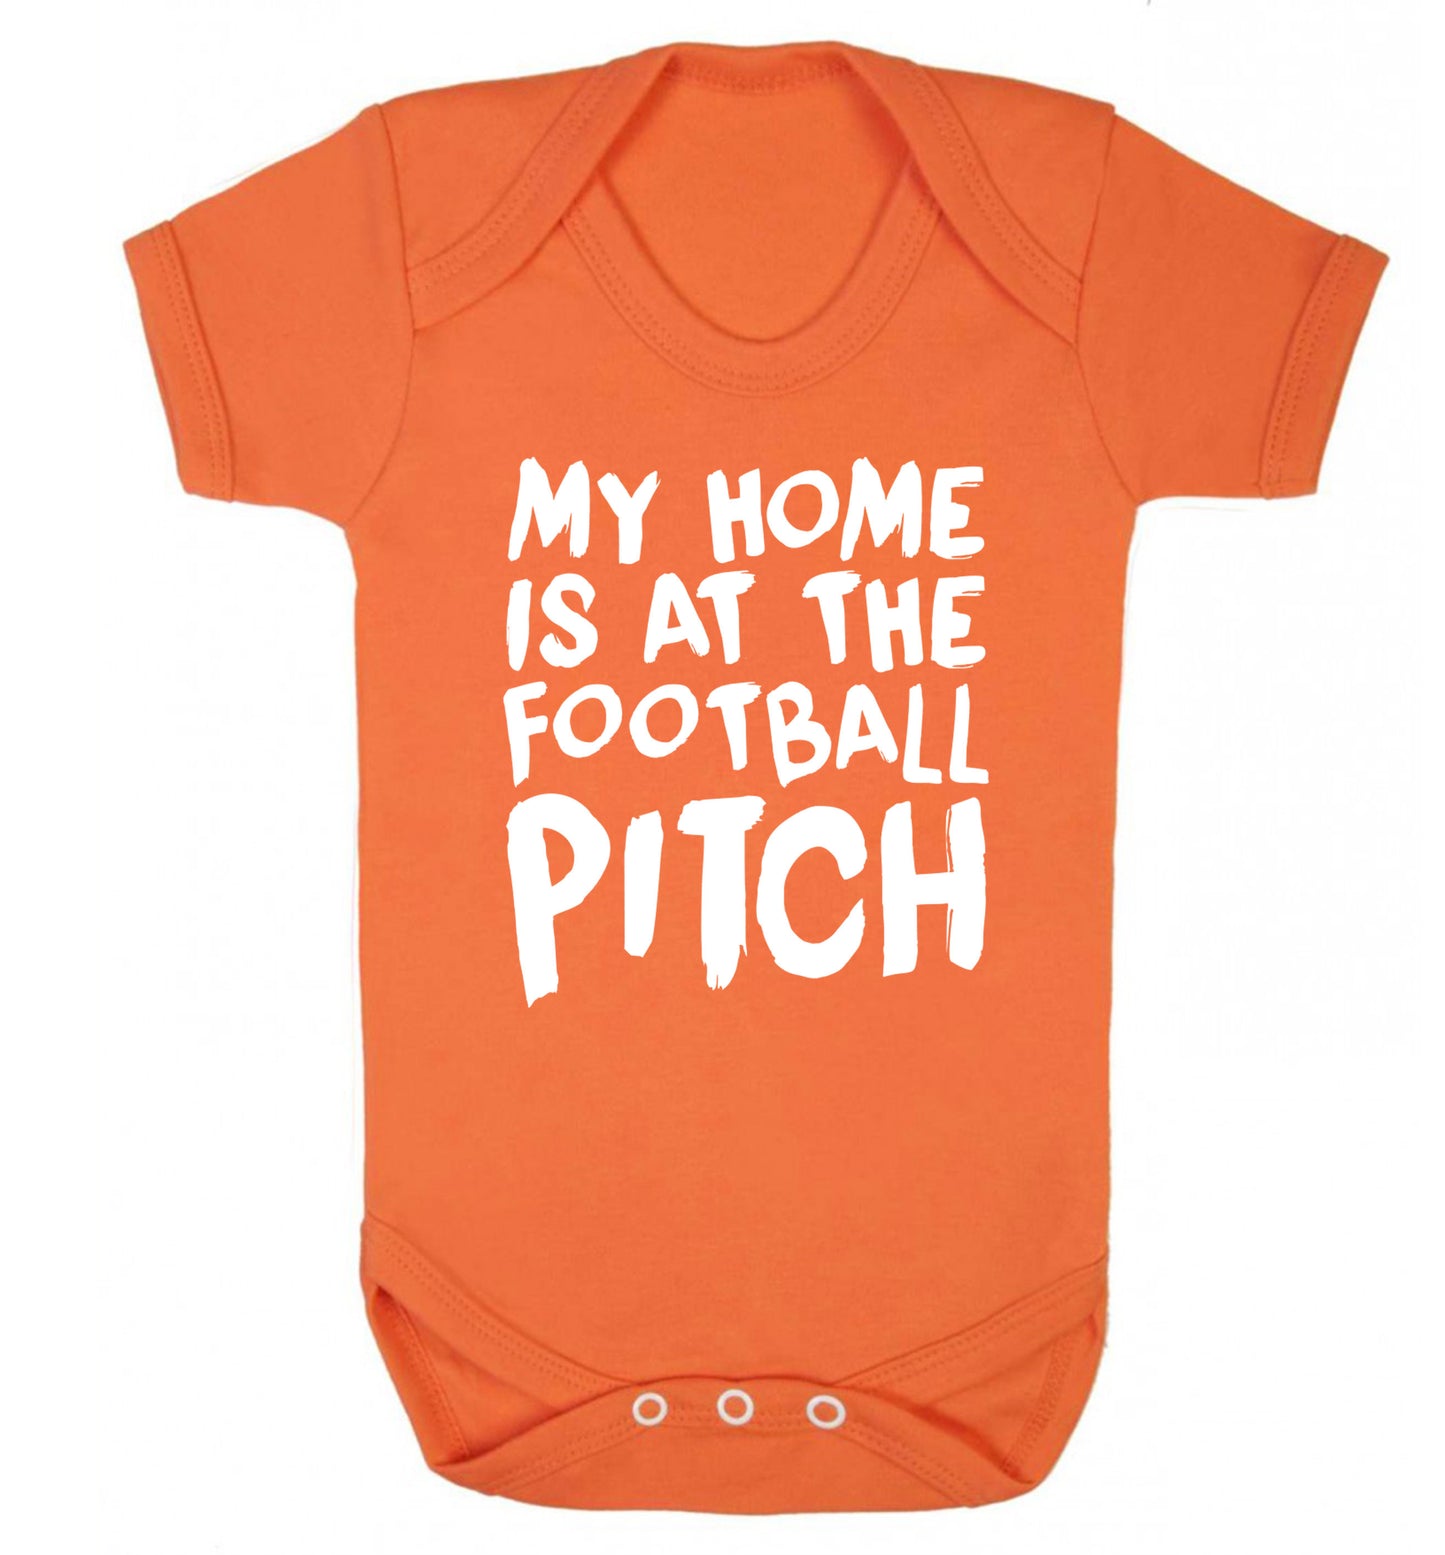 My home is at the football pitch Baby Vest orange 18-24 months